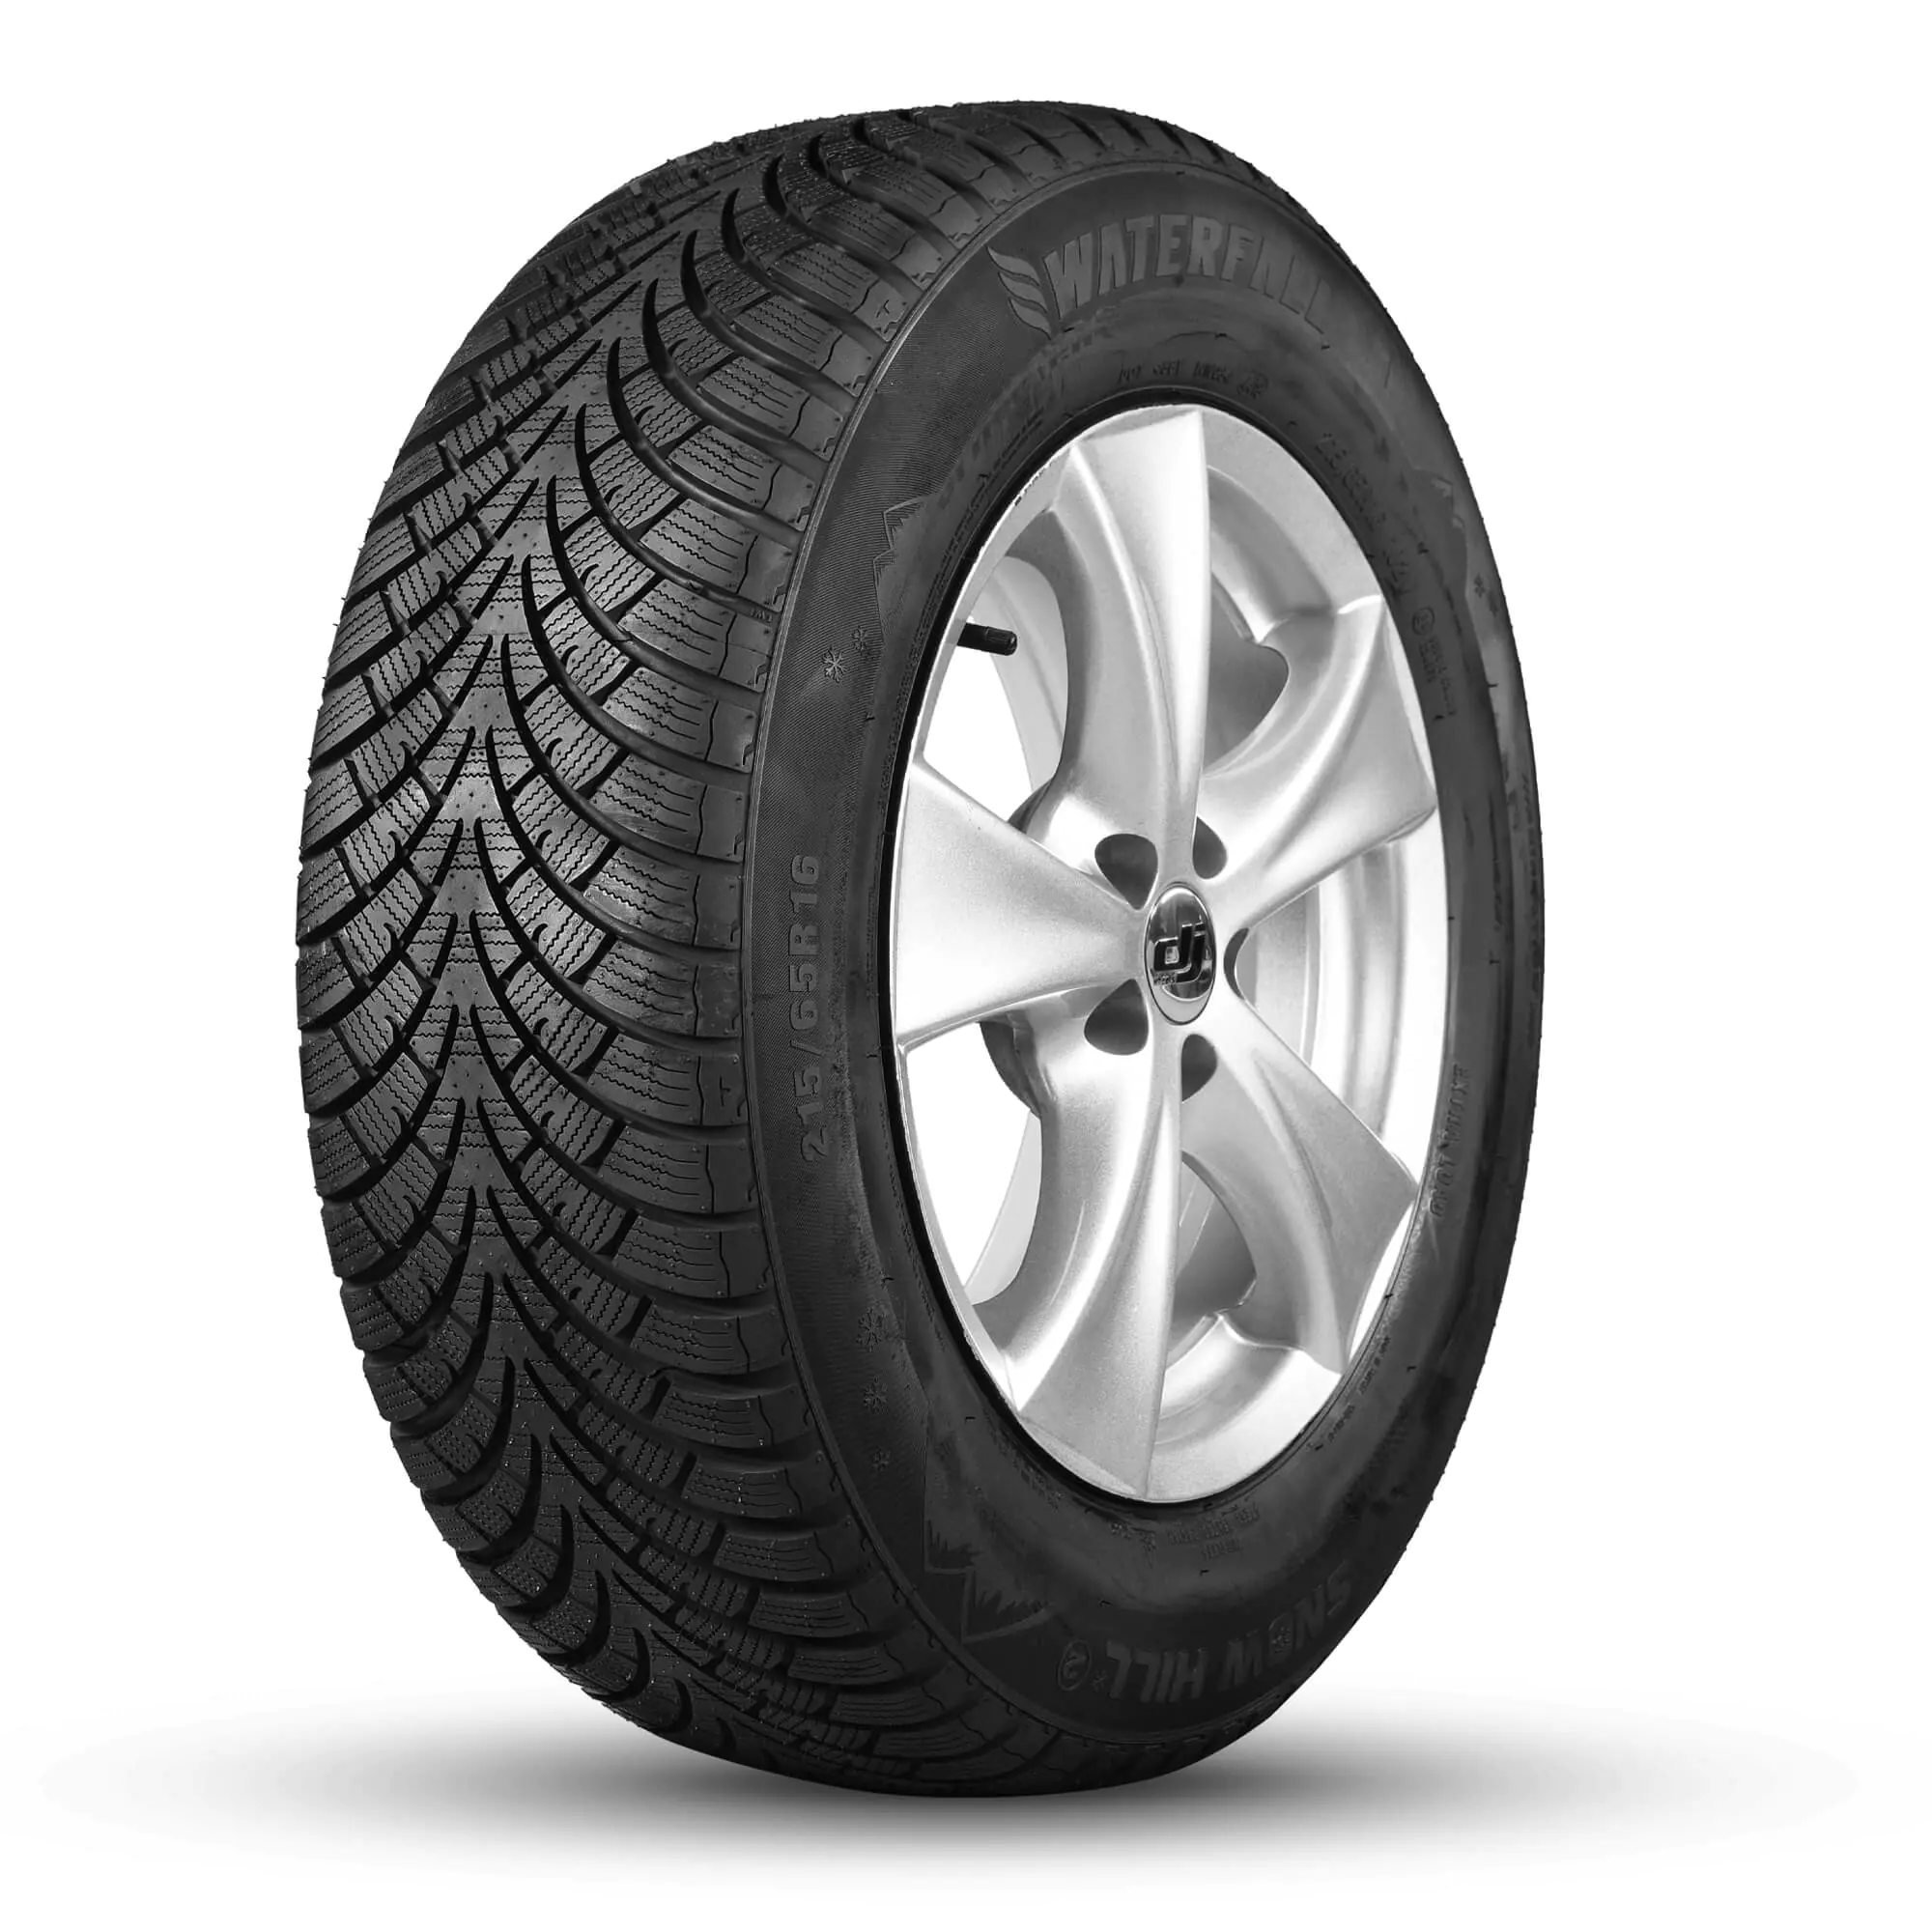 Gomme Autovettura Waterfall 225/45 R17 91V SNOW HILL 3 M+S Invernale